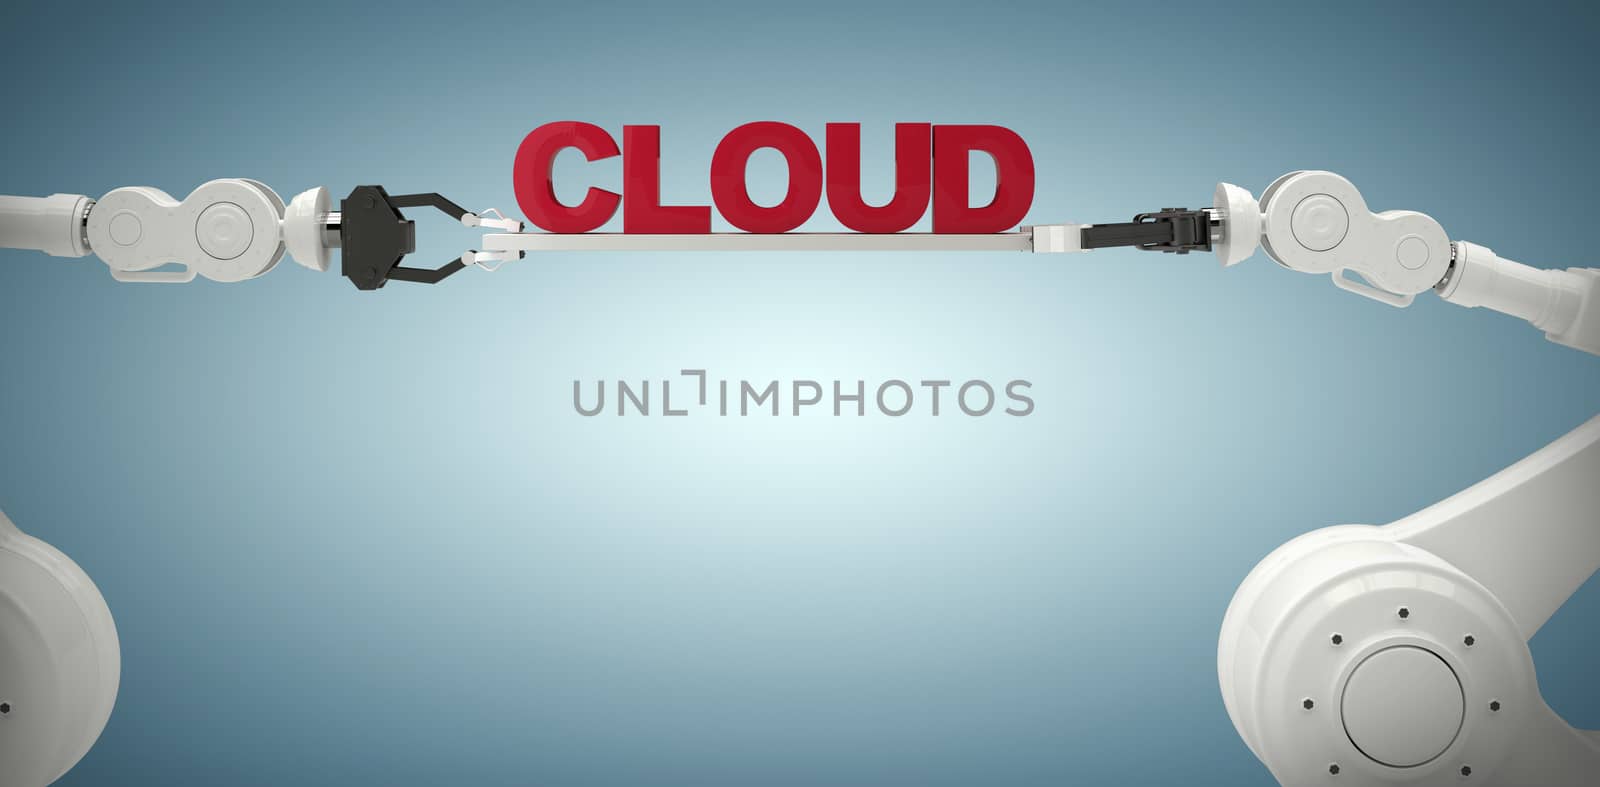 Composite image of digitally composite image of robotic hands holding cloud text by Wavebreakmedia